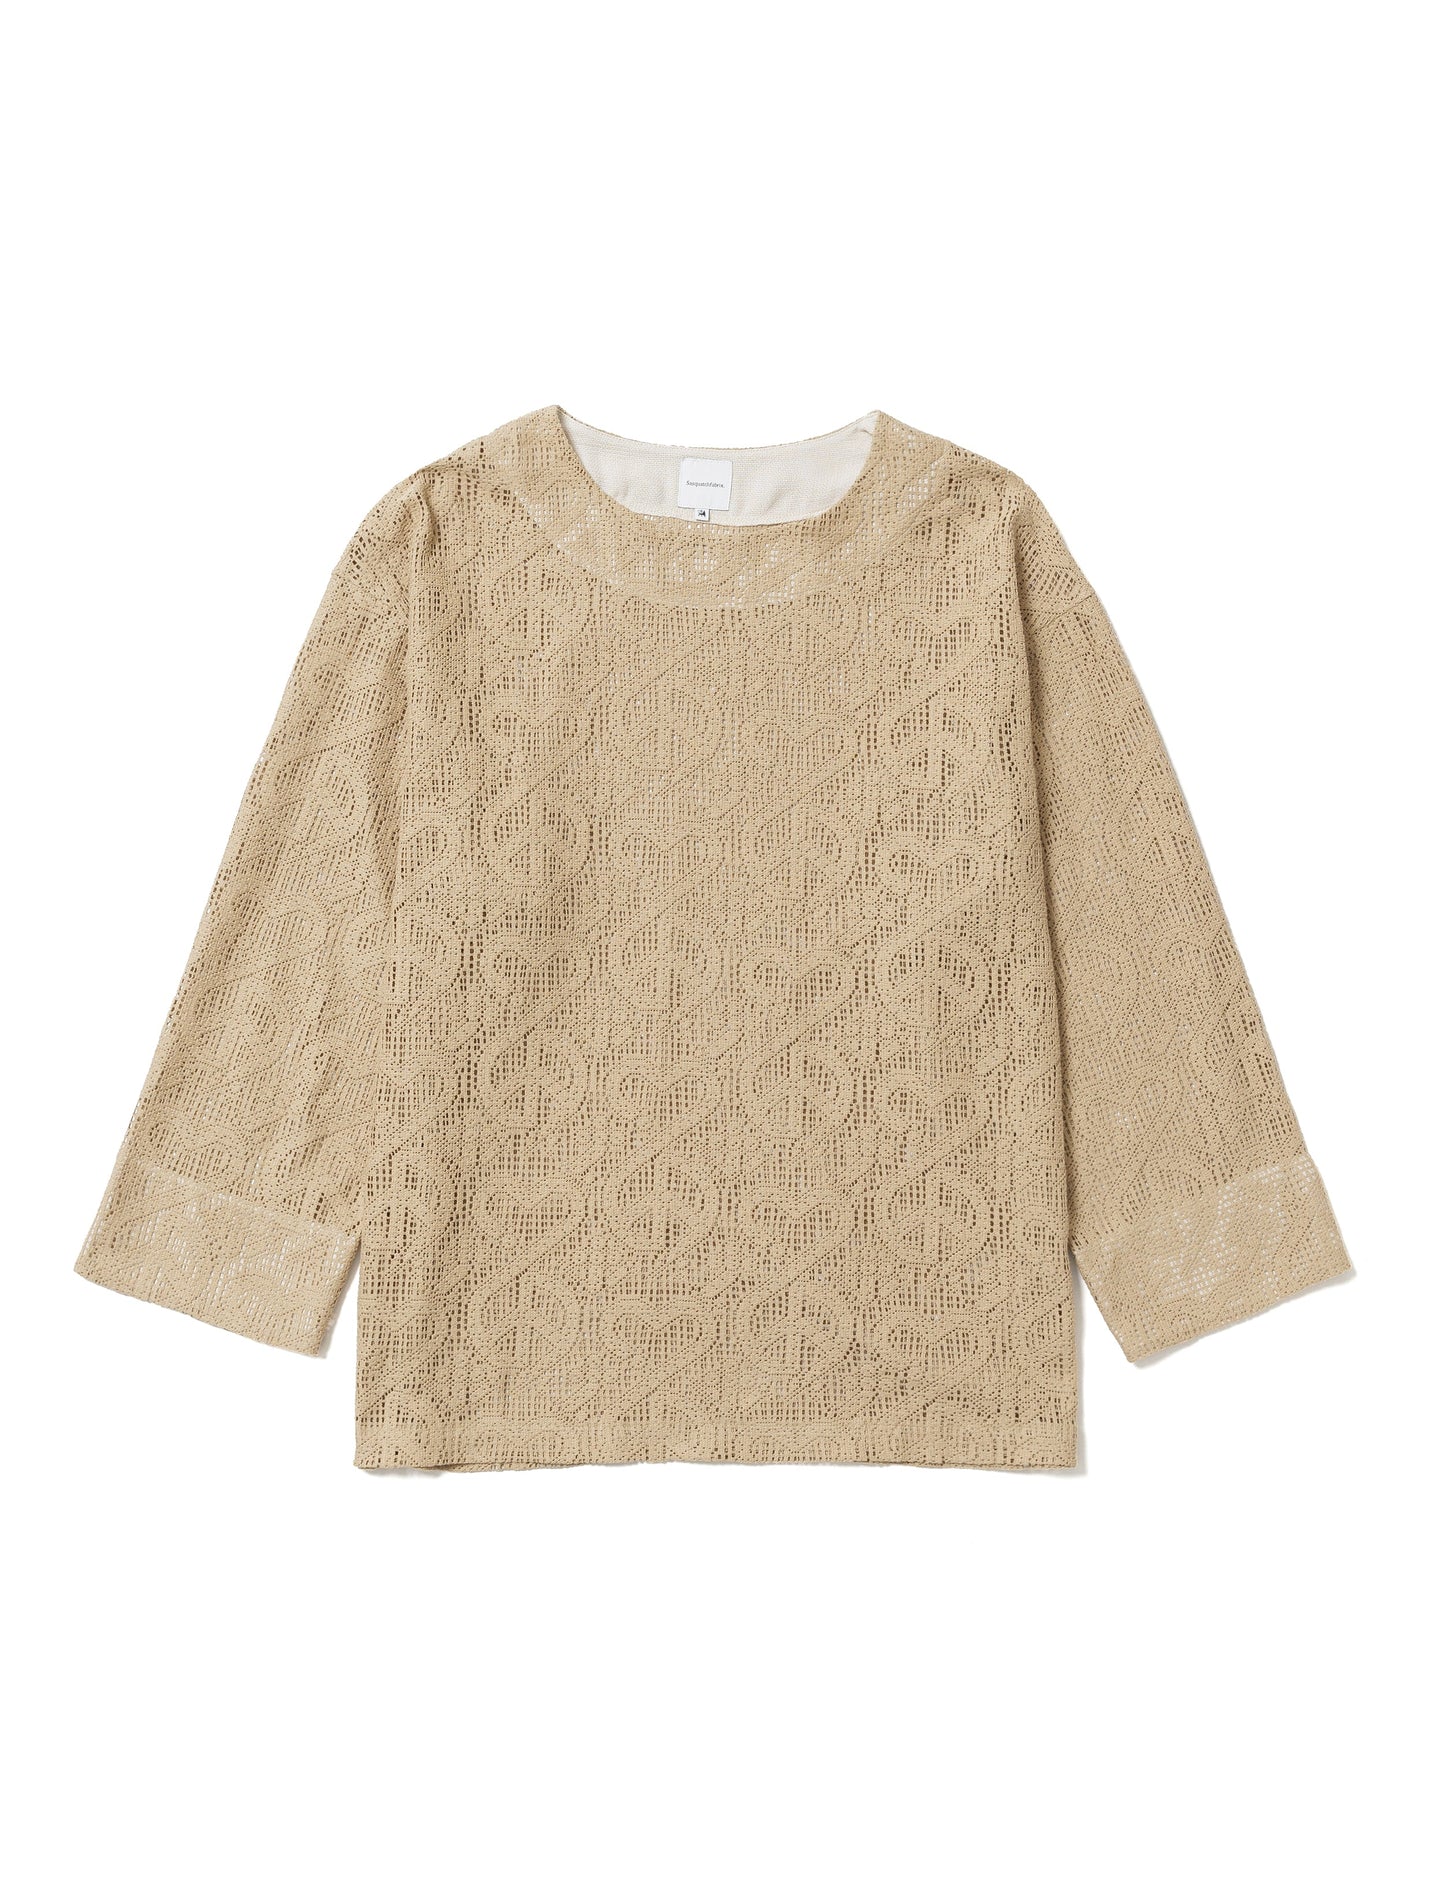 24SS-CSL-004 / “LOVE & PEACE” LACE SMOCK / OIL YELLOW